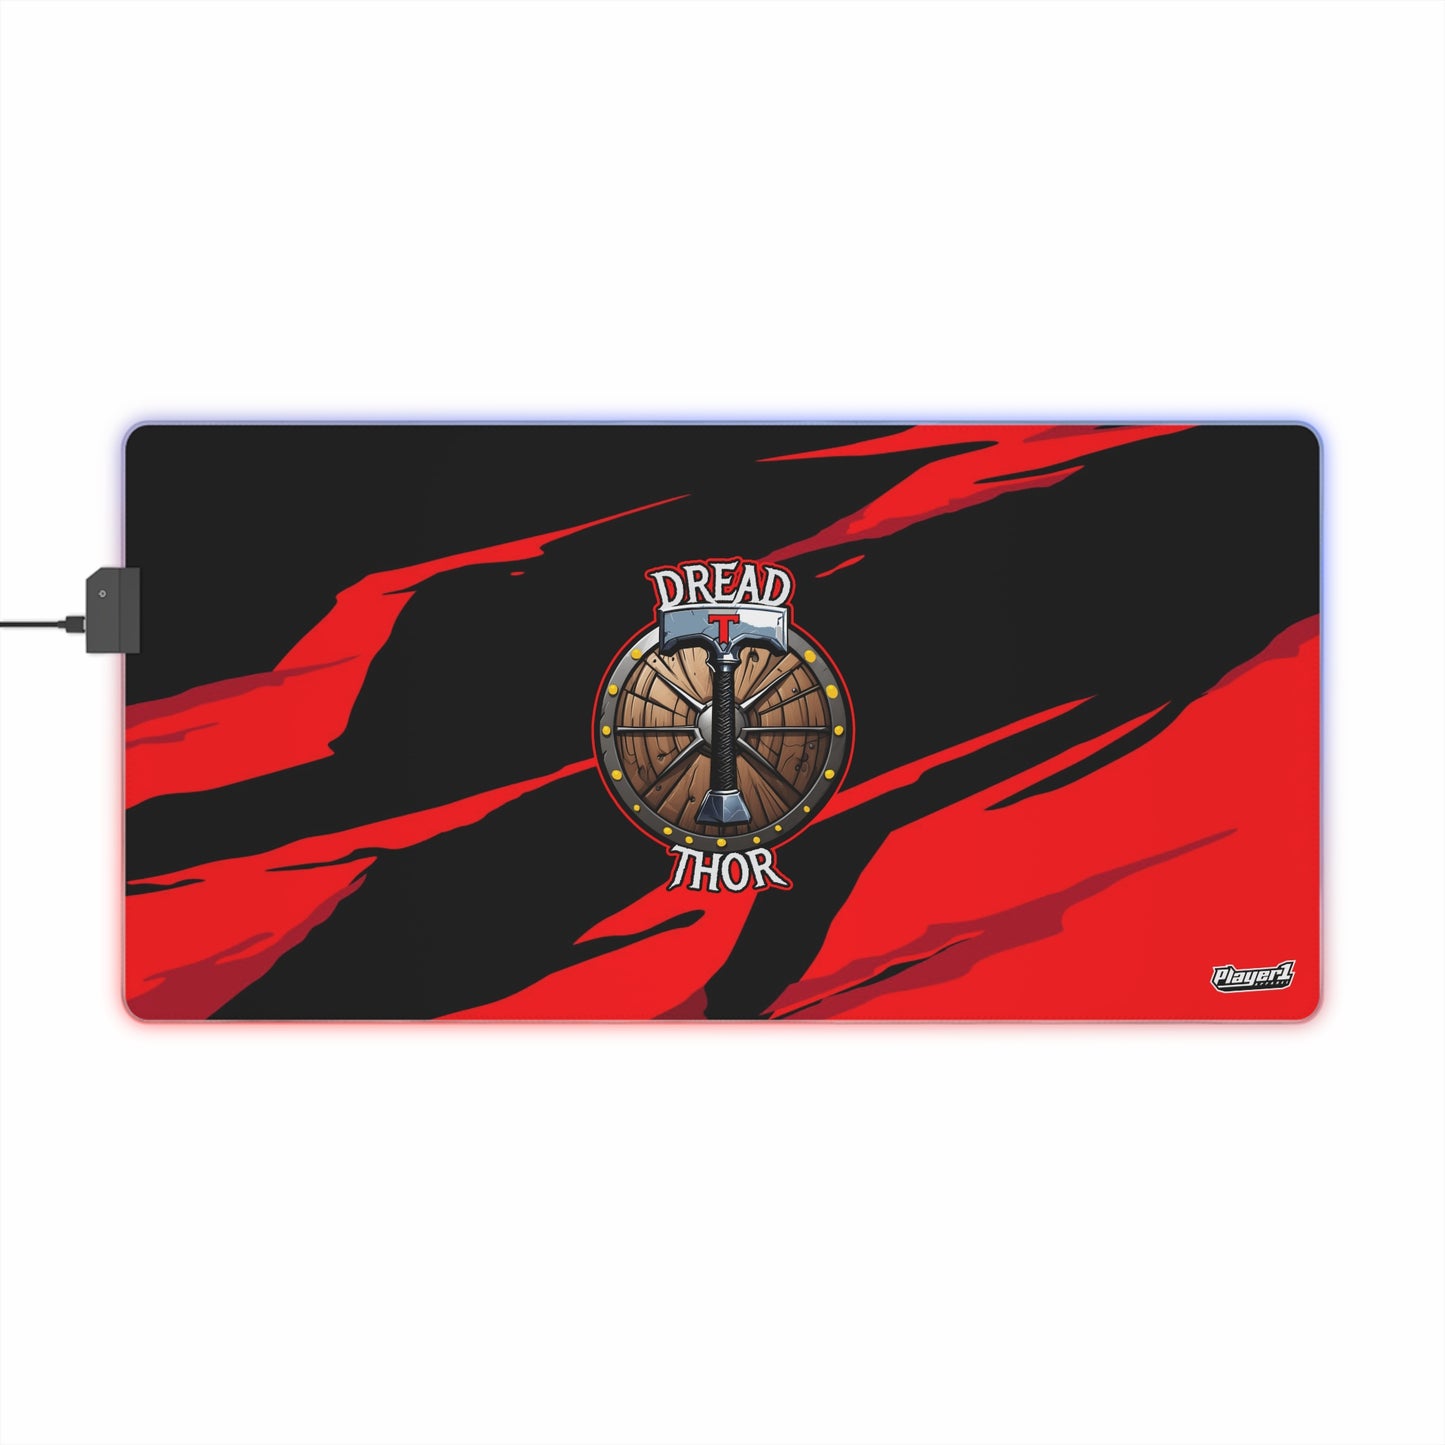 DreadThor LED Gaming Mouse Pad